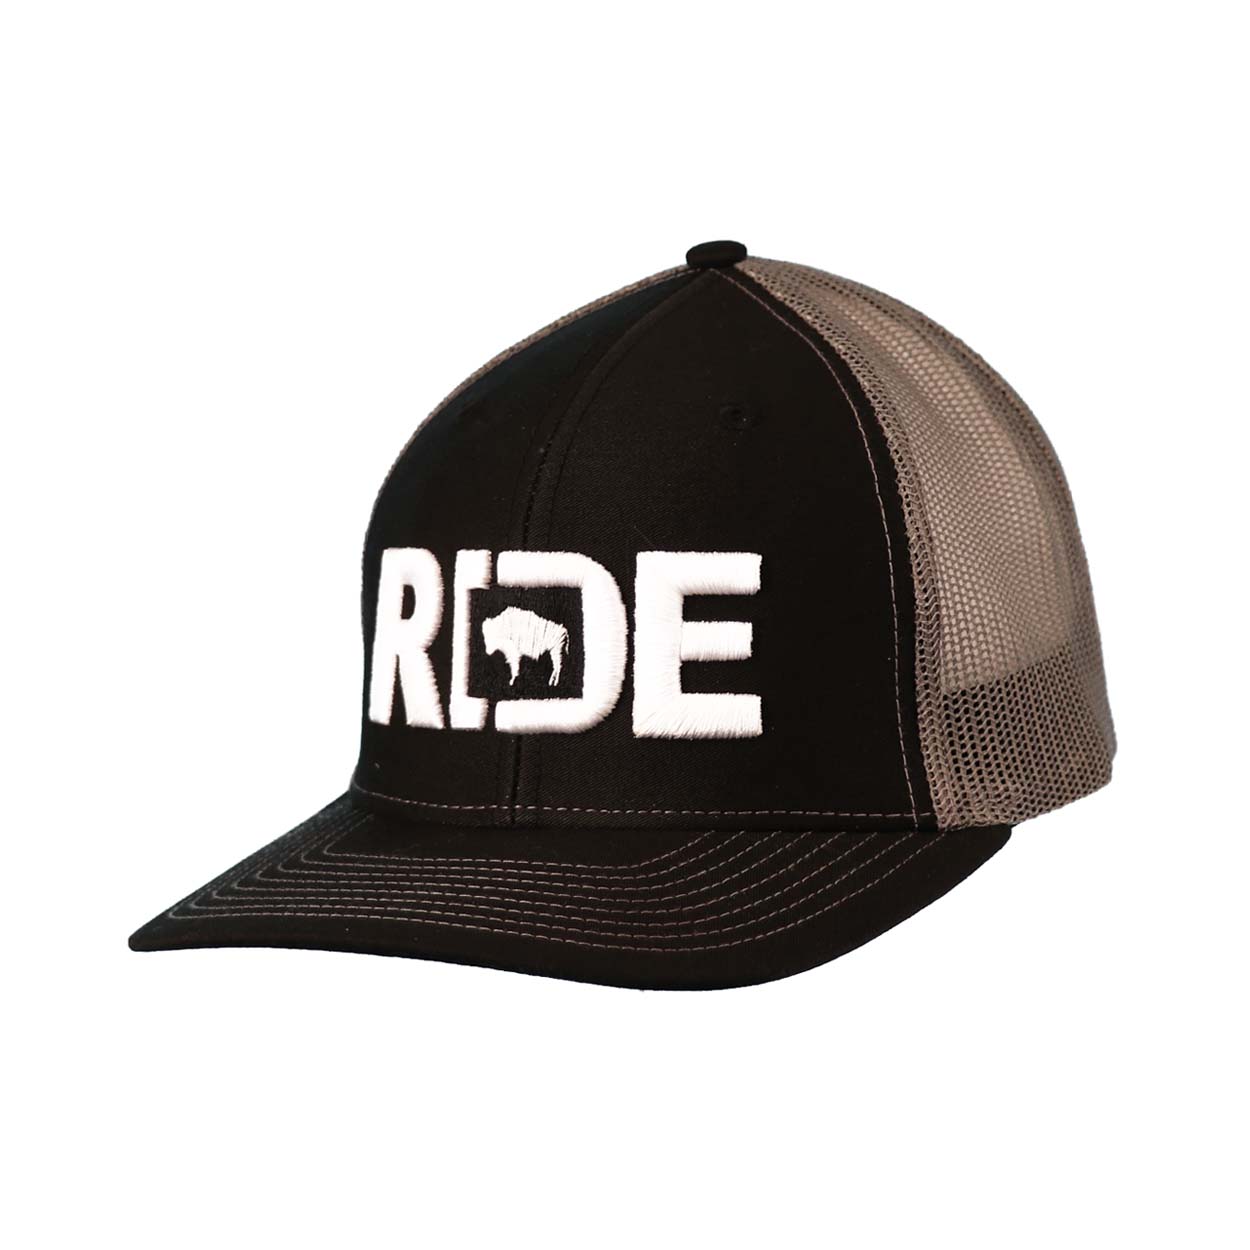 Ride Wyoming Classic Embroidered Snapback Trucker Hat Black/Charcoal